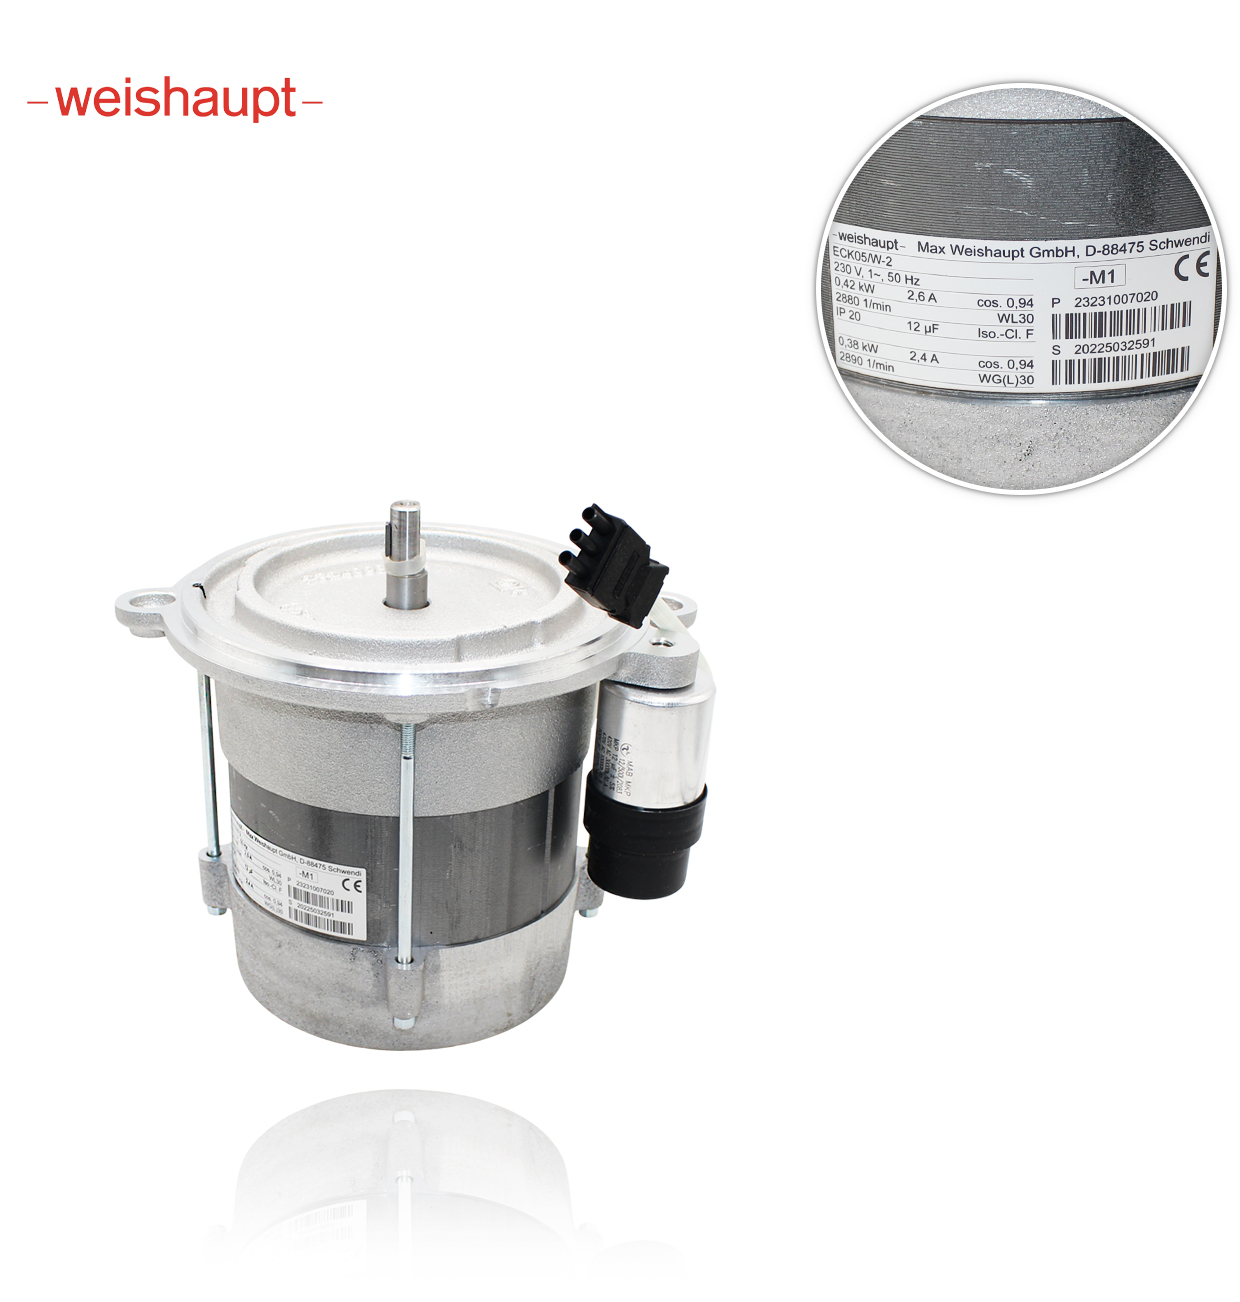 WEISHAUPT 24031007032 ECK 05/A2 230V 50Hz Kl.F IP21 MOTOR with capacitor and cable